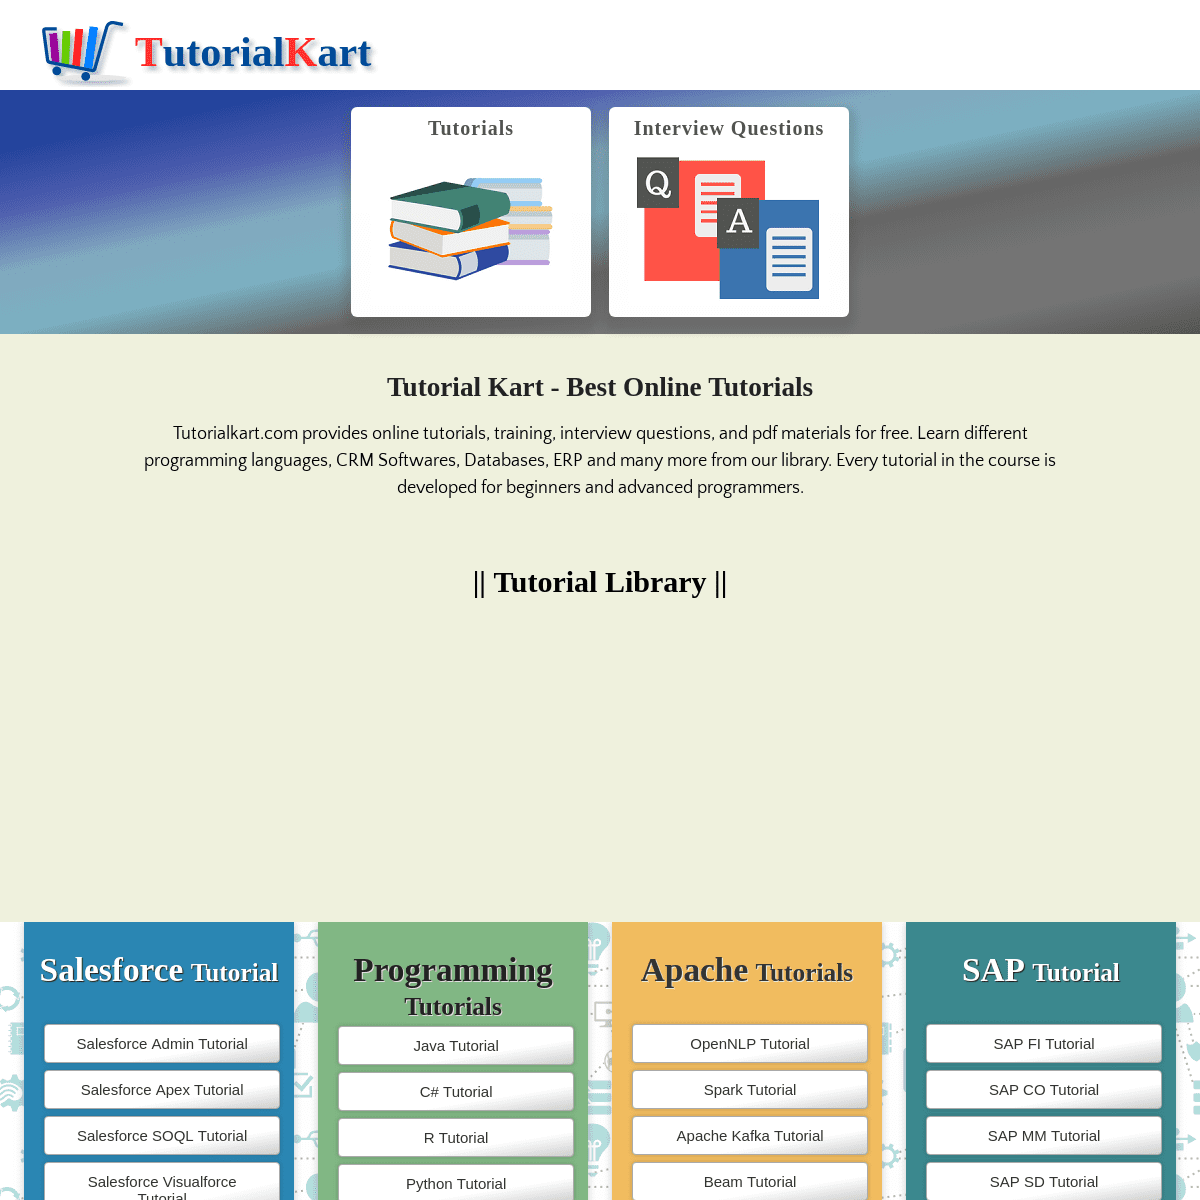 Tutorial Kart - Best Online Learning Site for Free Tutorials, Online Training, Courses, Materials and Interview Questions - SAP 